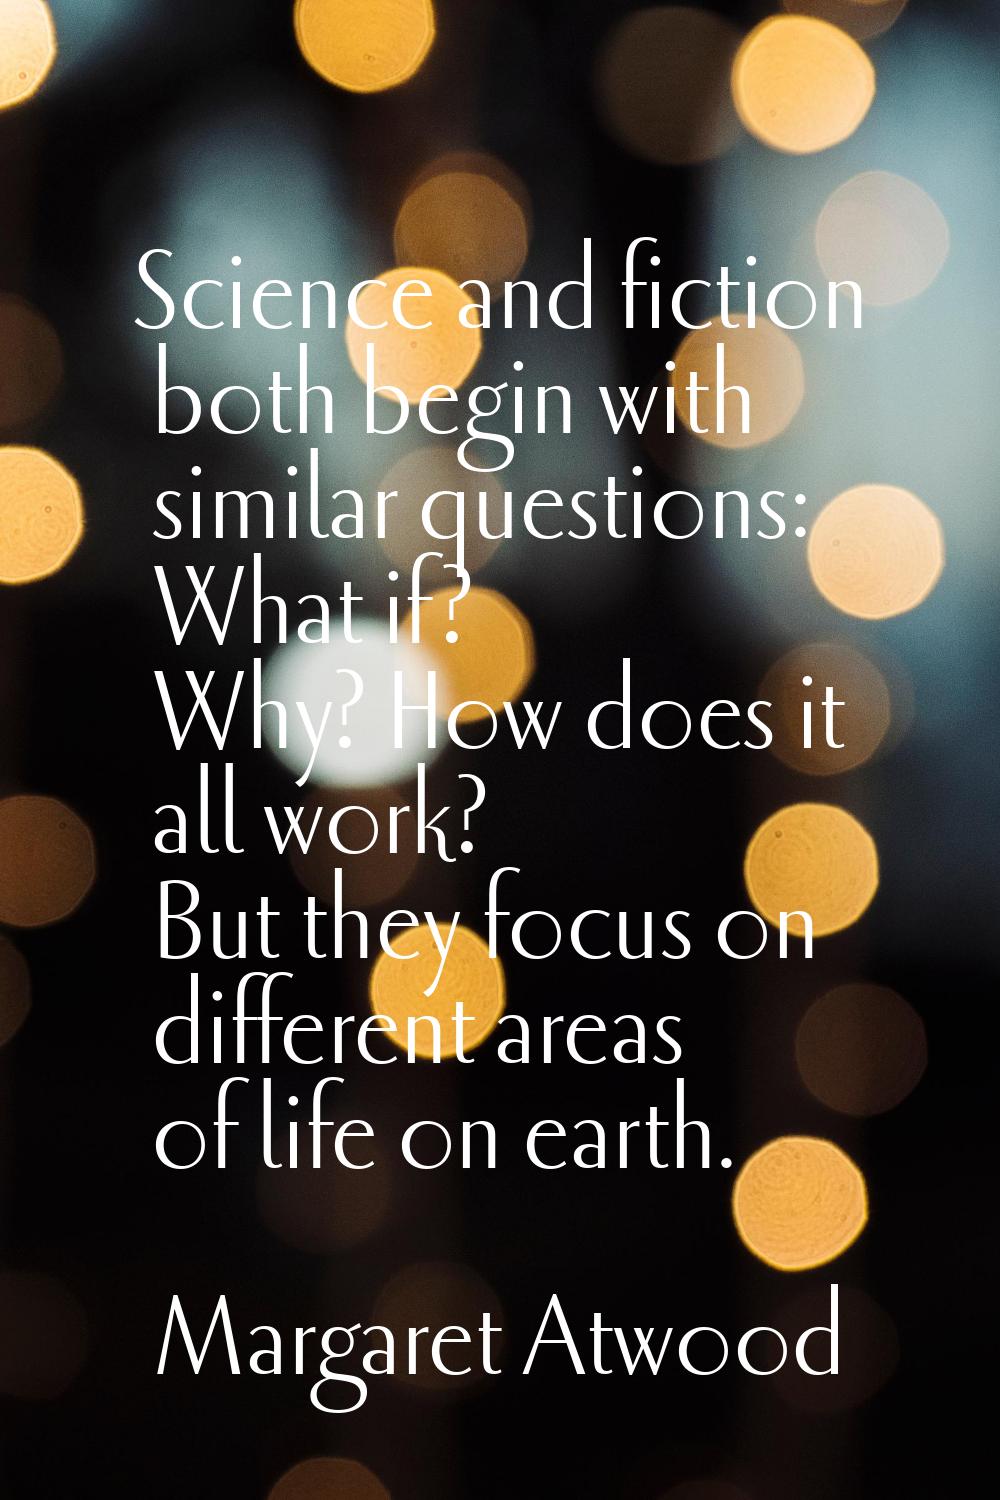 Science and fiction both begin with similar questions: What if? Why? How does it all work? But they